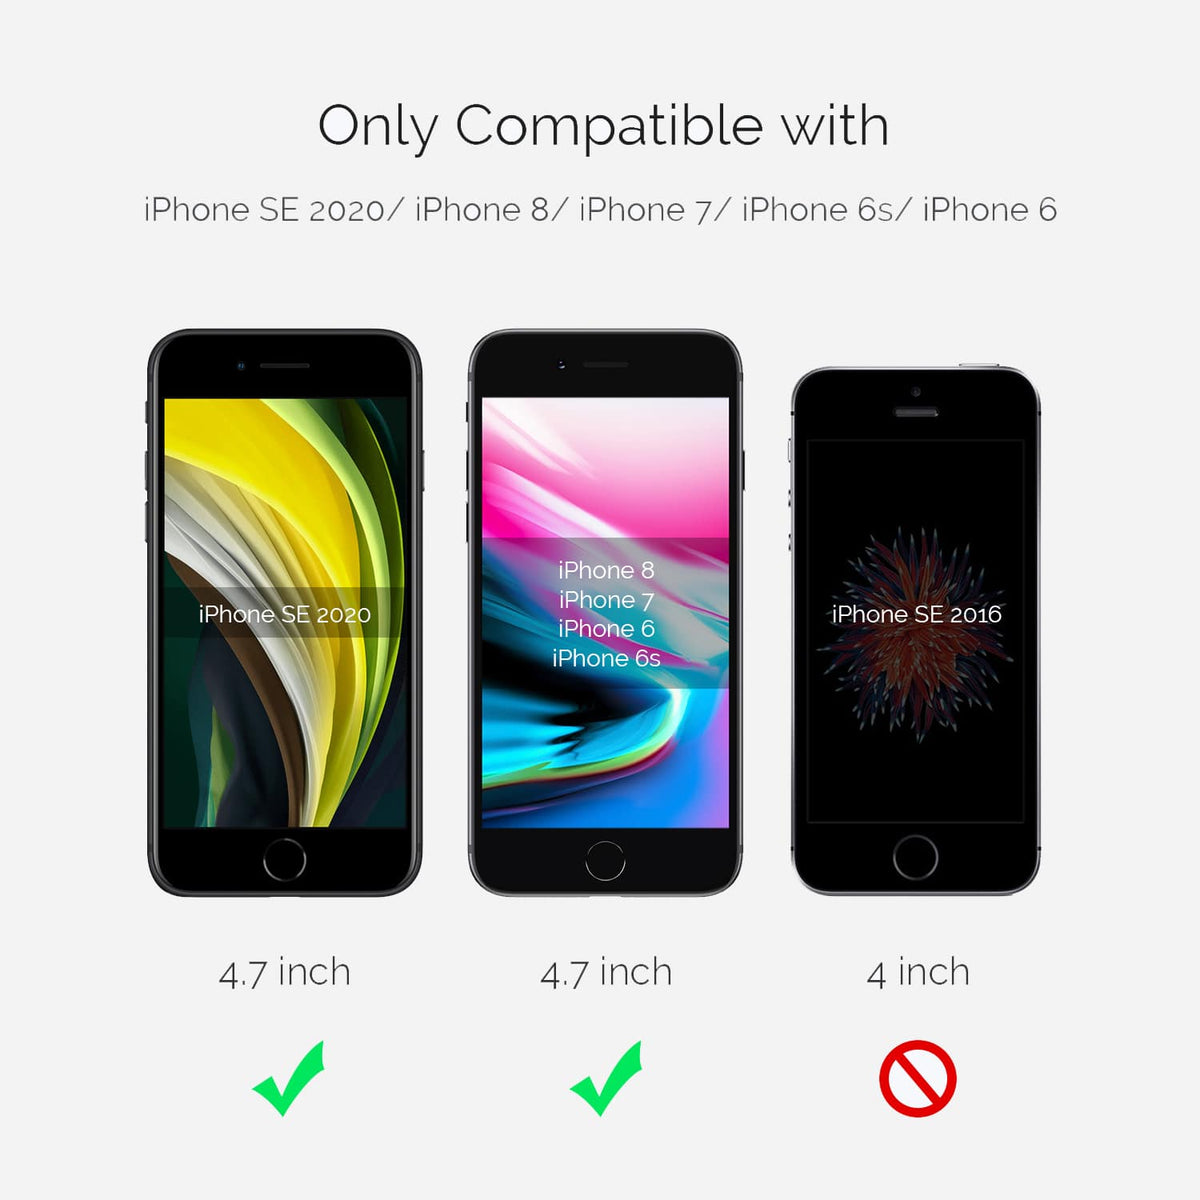 3 iphone models only compatible with iphone SE 2020 iPhone 8 iPhone 7 iPhone 6S iPhone 6